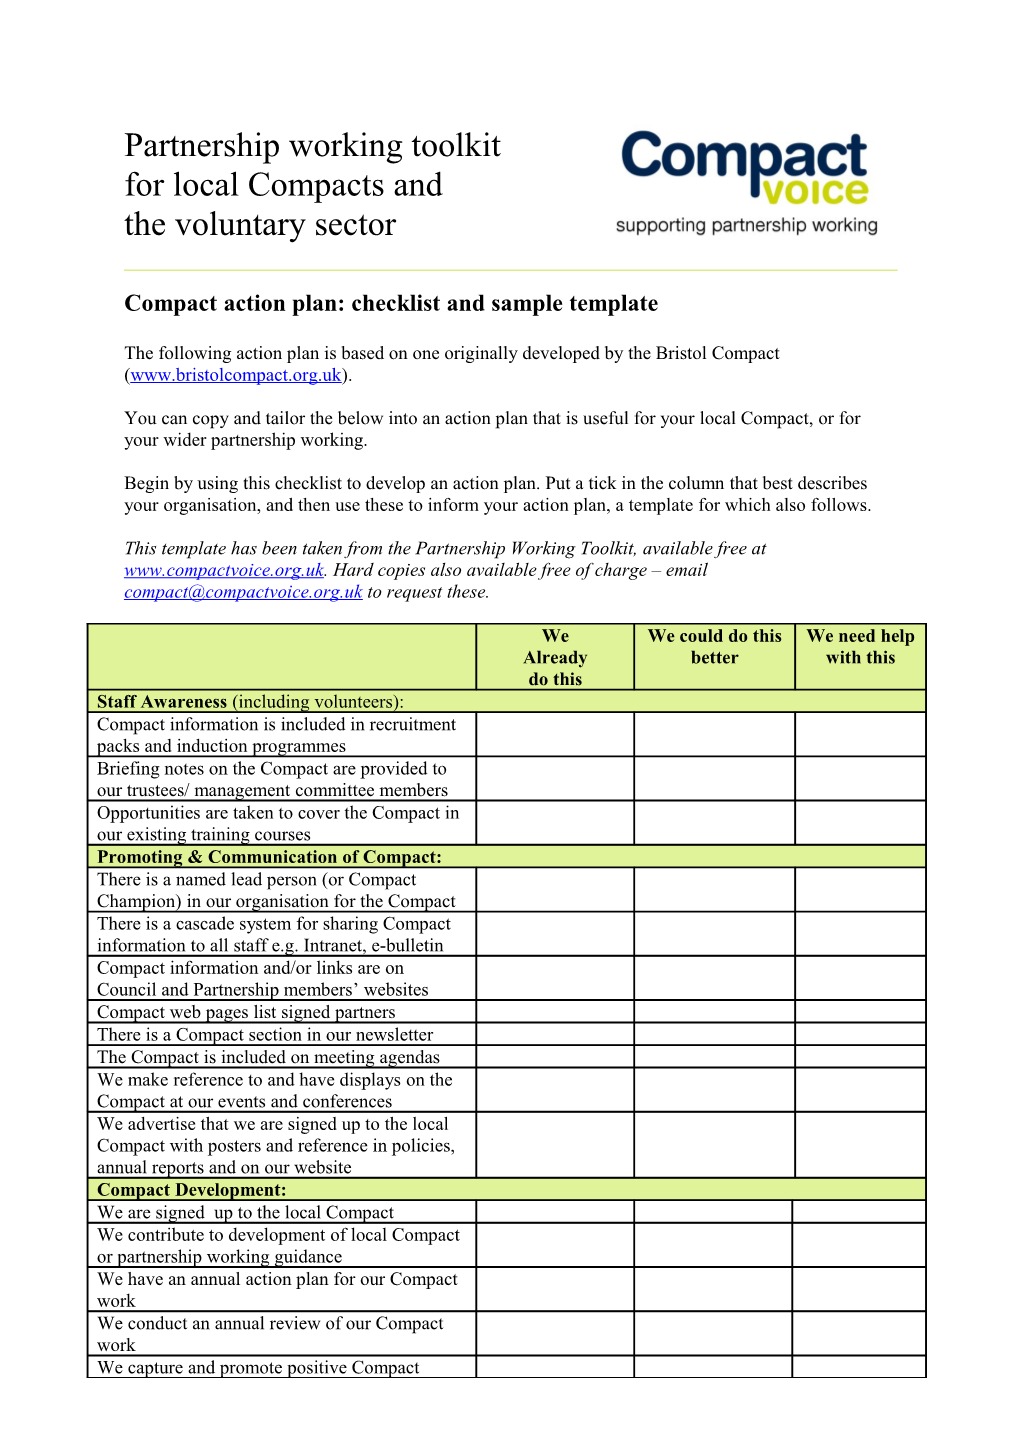 Compact Action Plan: Checklist and Sample Template